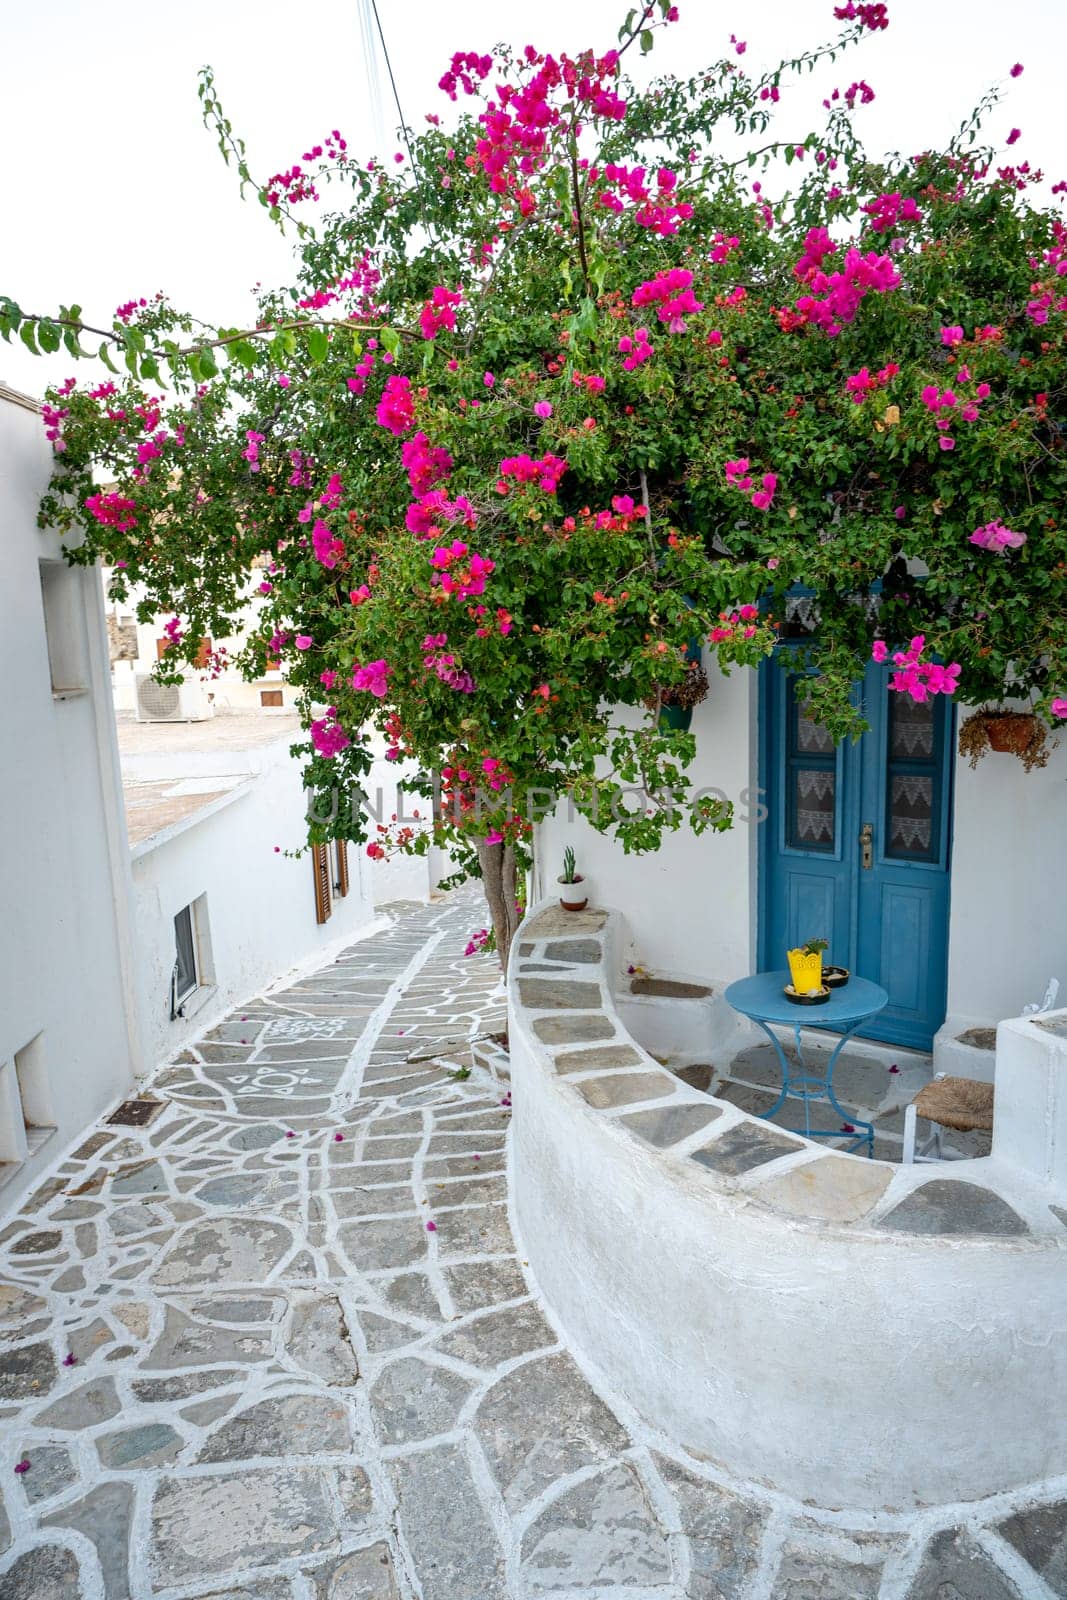 Bougainvillea in the streets of Lefkes, Paros by LopezPastor